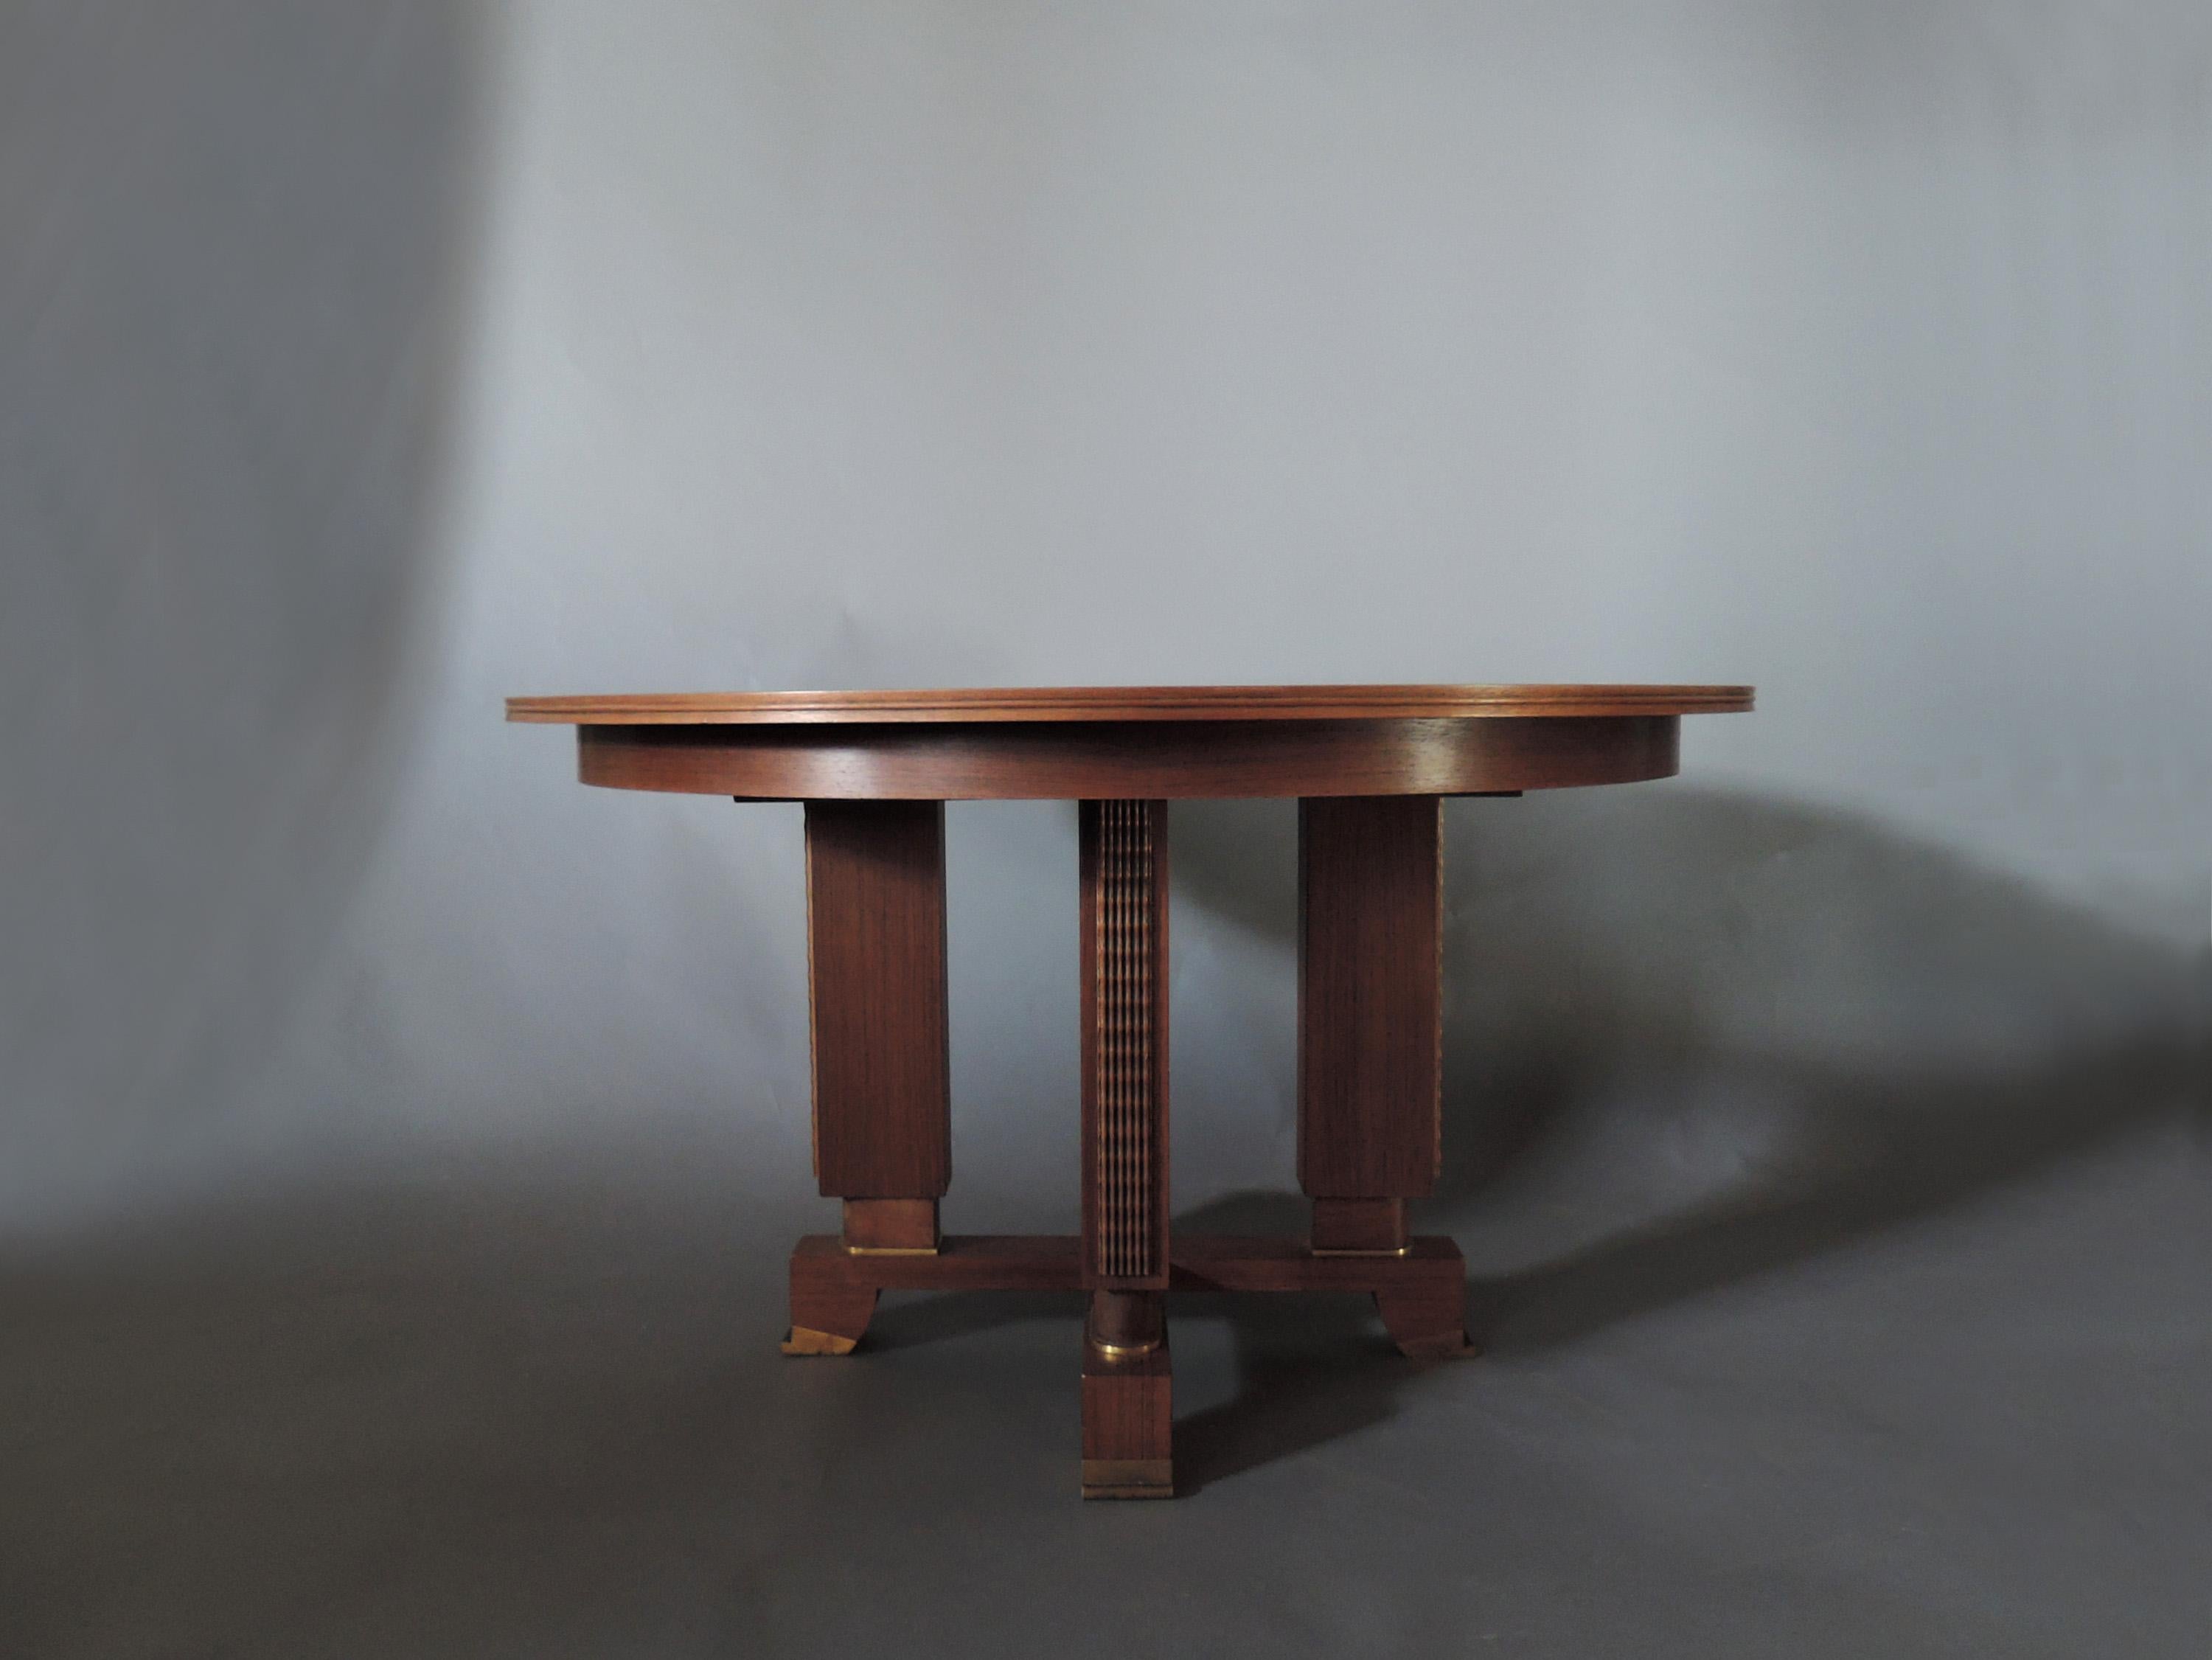 Jules Leleu: A fine French Art Deco sunburst top dining / center table in palissander with a 4 legs pedestal base and bronze details.
2 original raw wood center leaves, length with leaves is 89 3/4